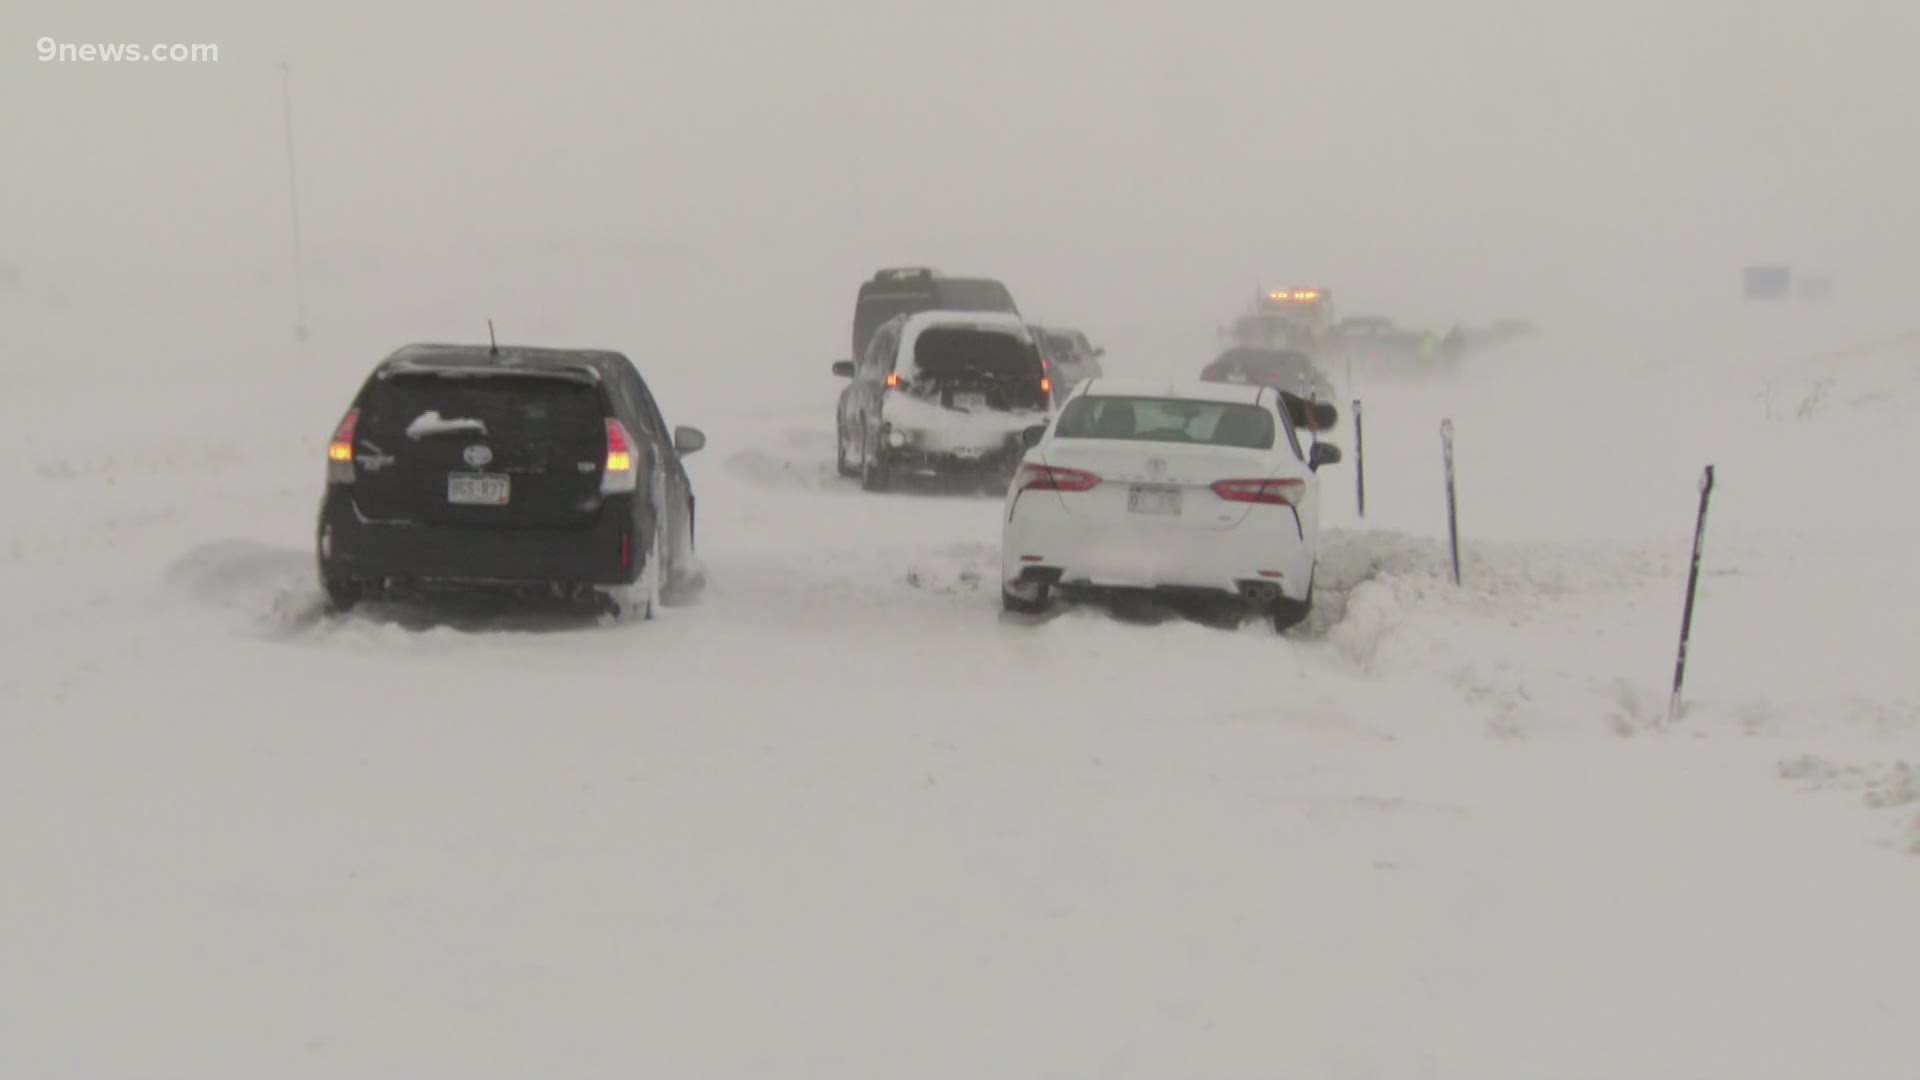 Cars were stranded in the snow near Denver International Airport as a blizzard warning was in effect for the Front Range.